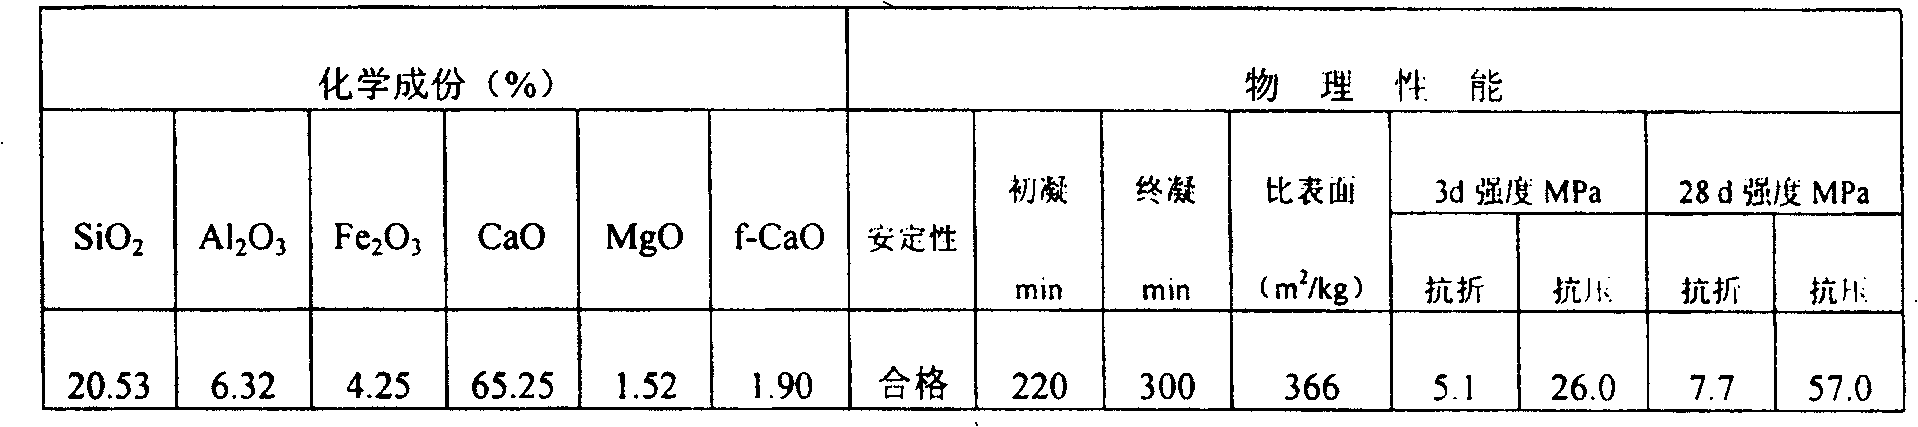 Process of preparing portland cement with waste ceramic tile polishing material